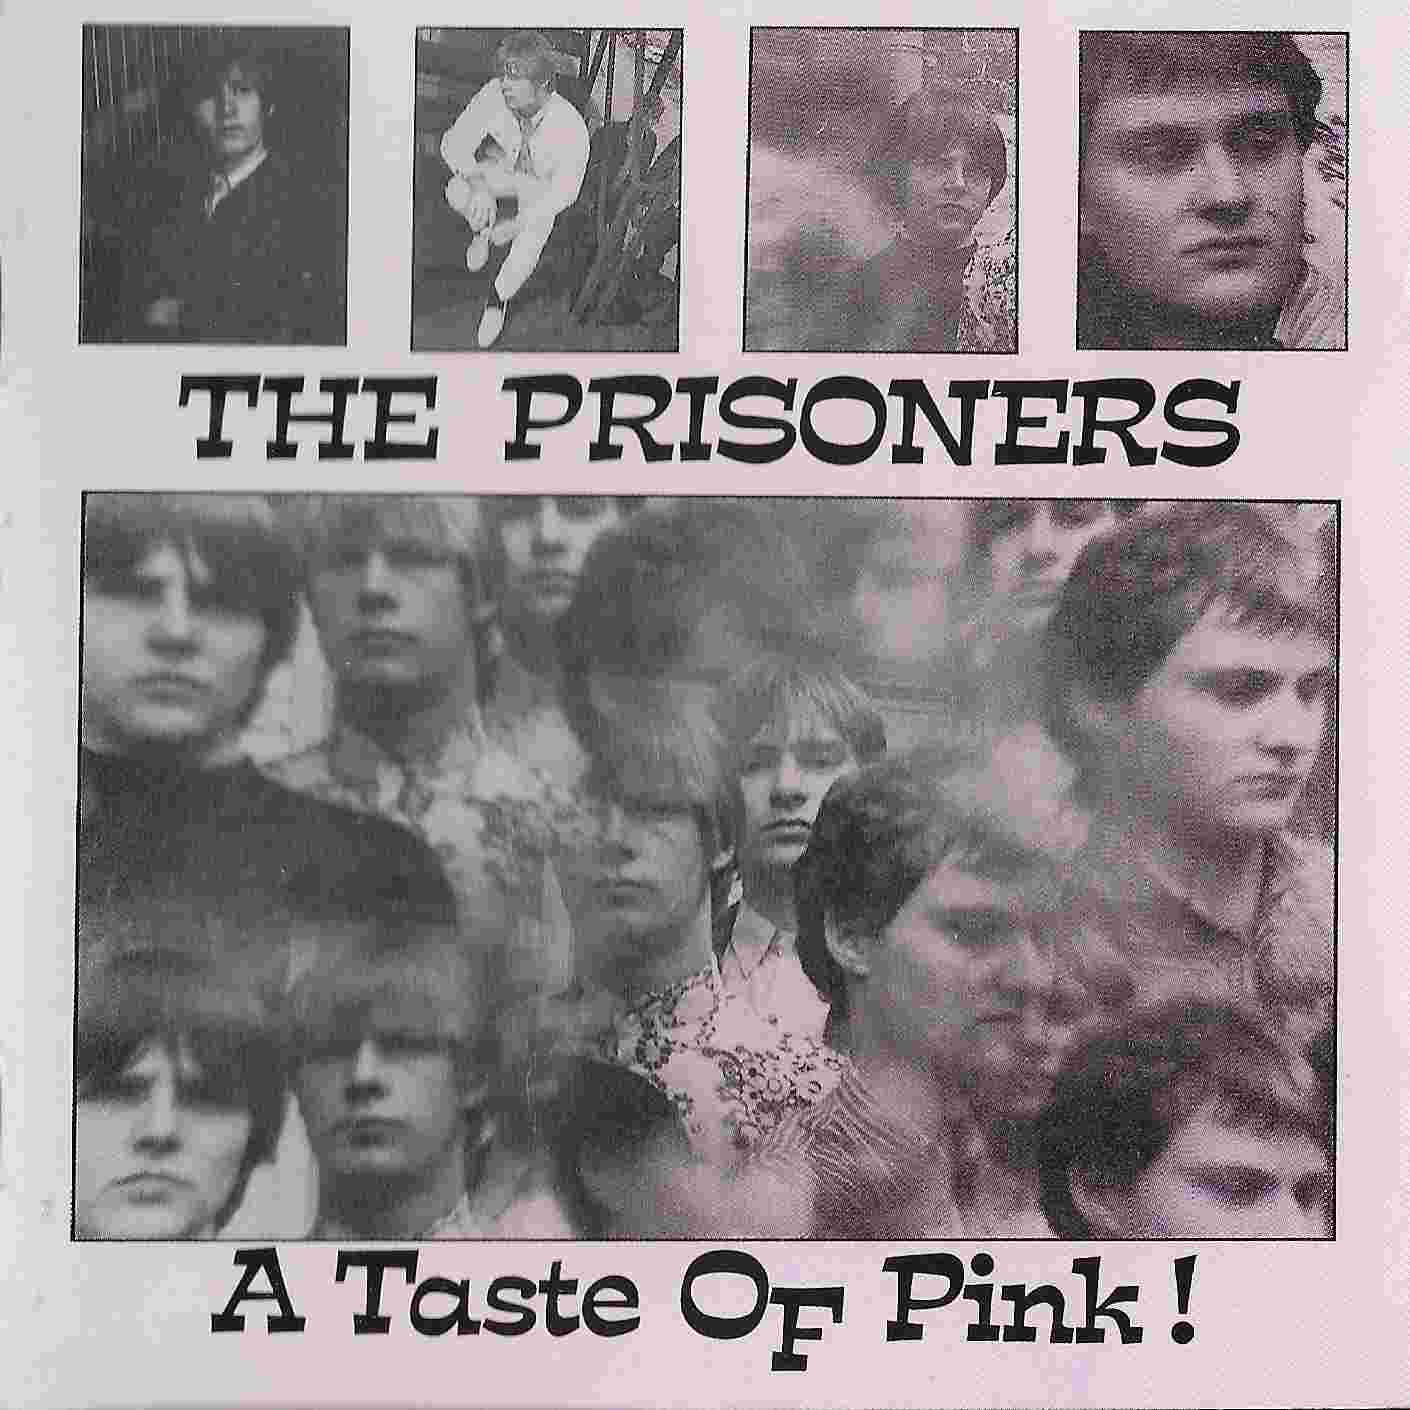 Picture of A taste of pink by artist The Prisoners 